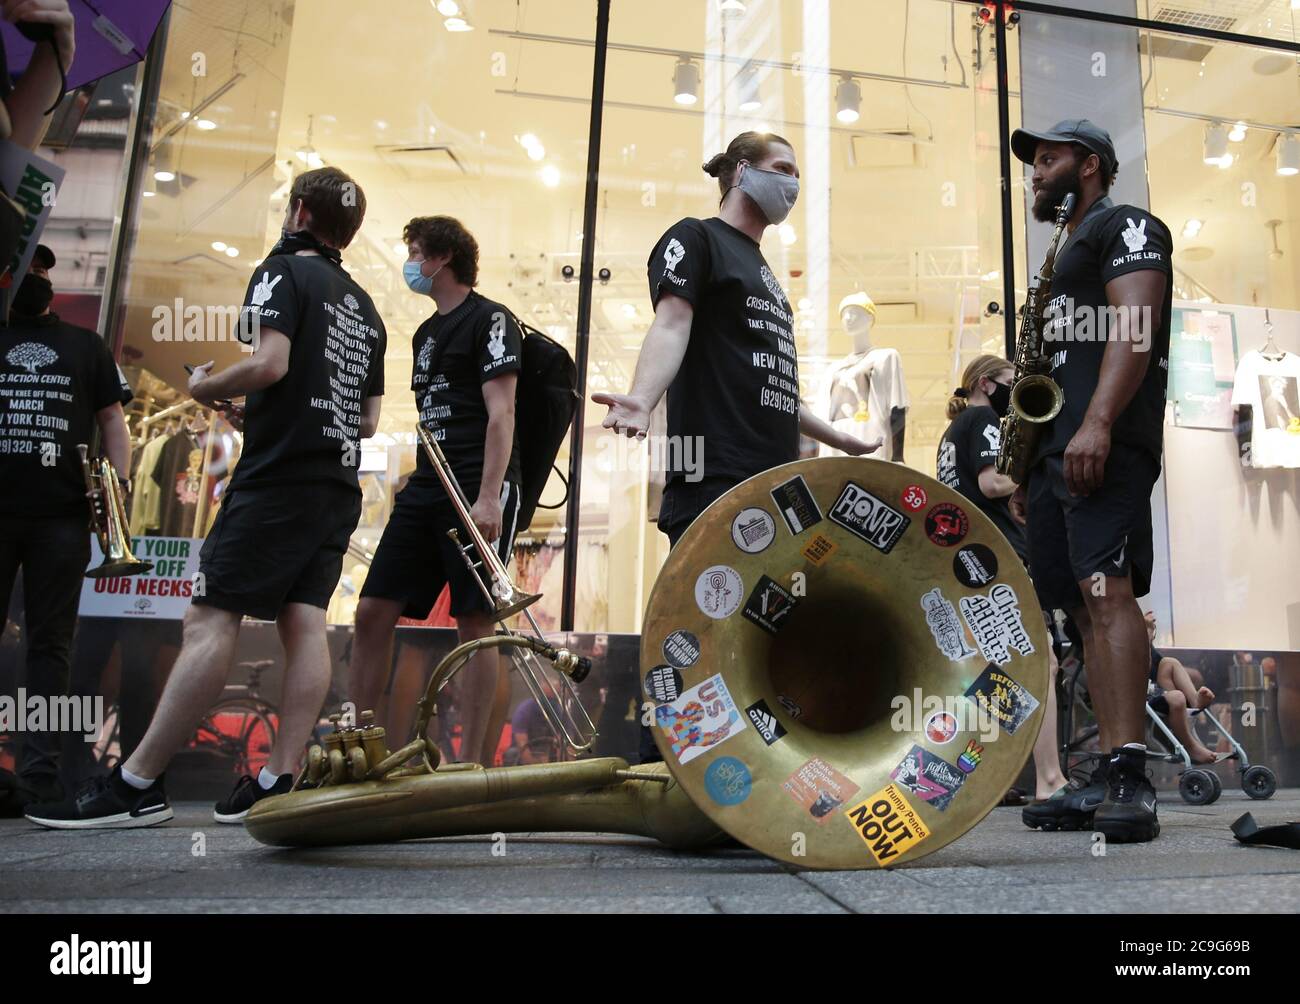 New York, United States. 31st July, 2020. People gather in Times Square for the 'Take Your Knee Off Our Necks March' in New York City on Friday, July 31, 2020. The 'Take Your Knee Off Our Necks March' is a protest of police brutality, black on black crime, institutionalized racism, discrimination, immigration, education equality, and youth resources. Photo by John Angelillo/UPI Credit: UPI/Alamy Live News Stock Photo